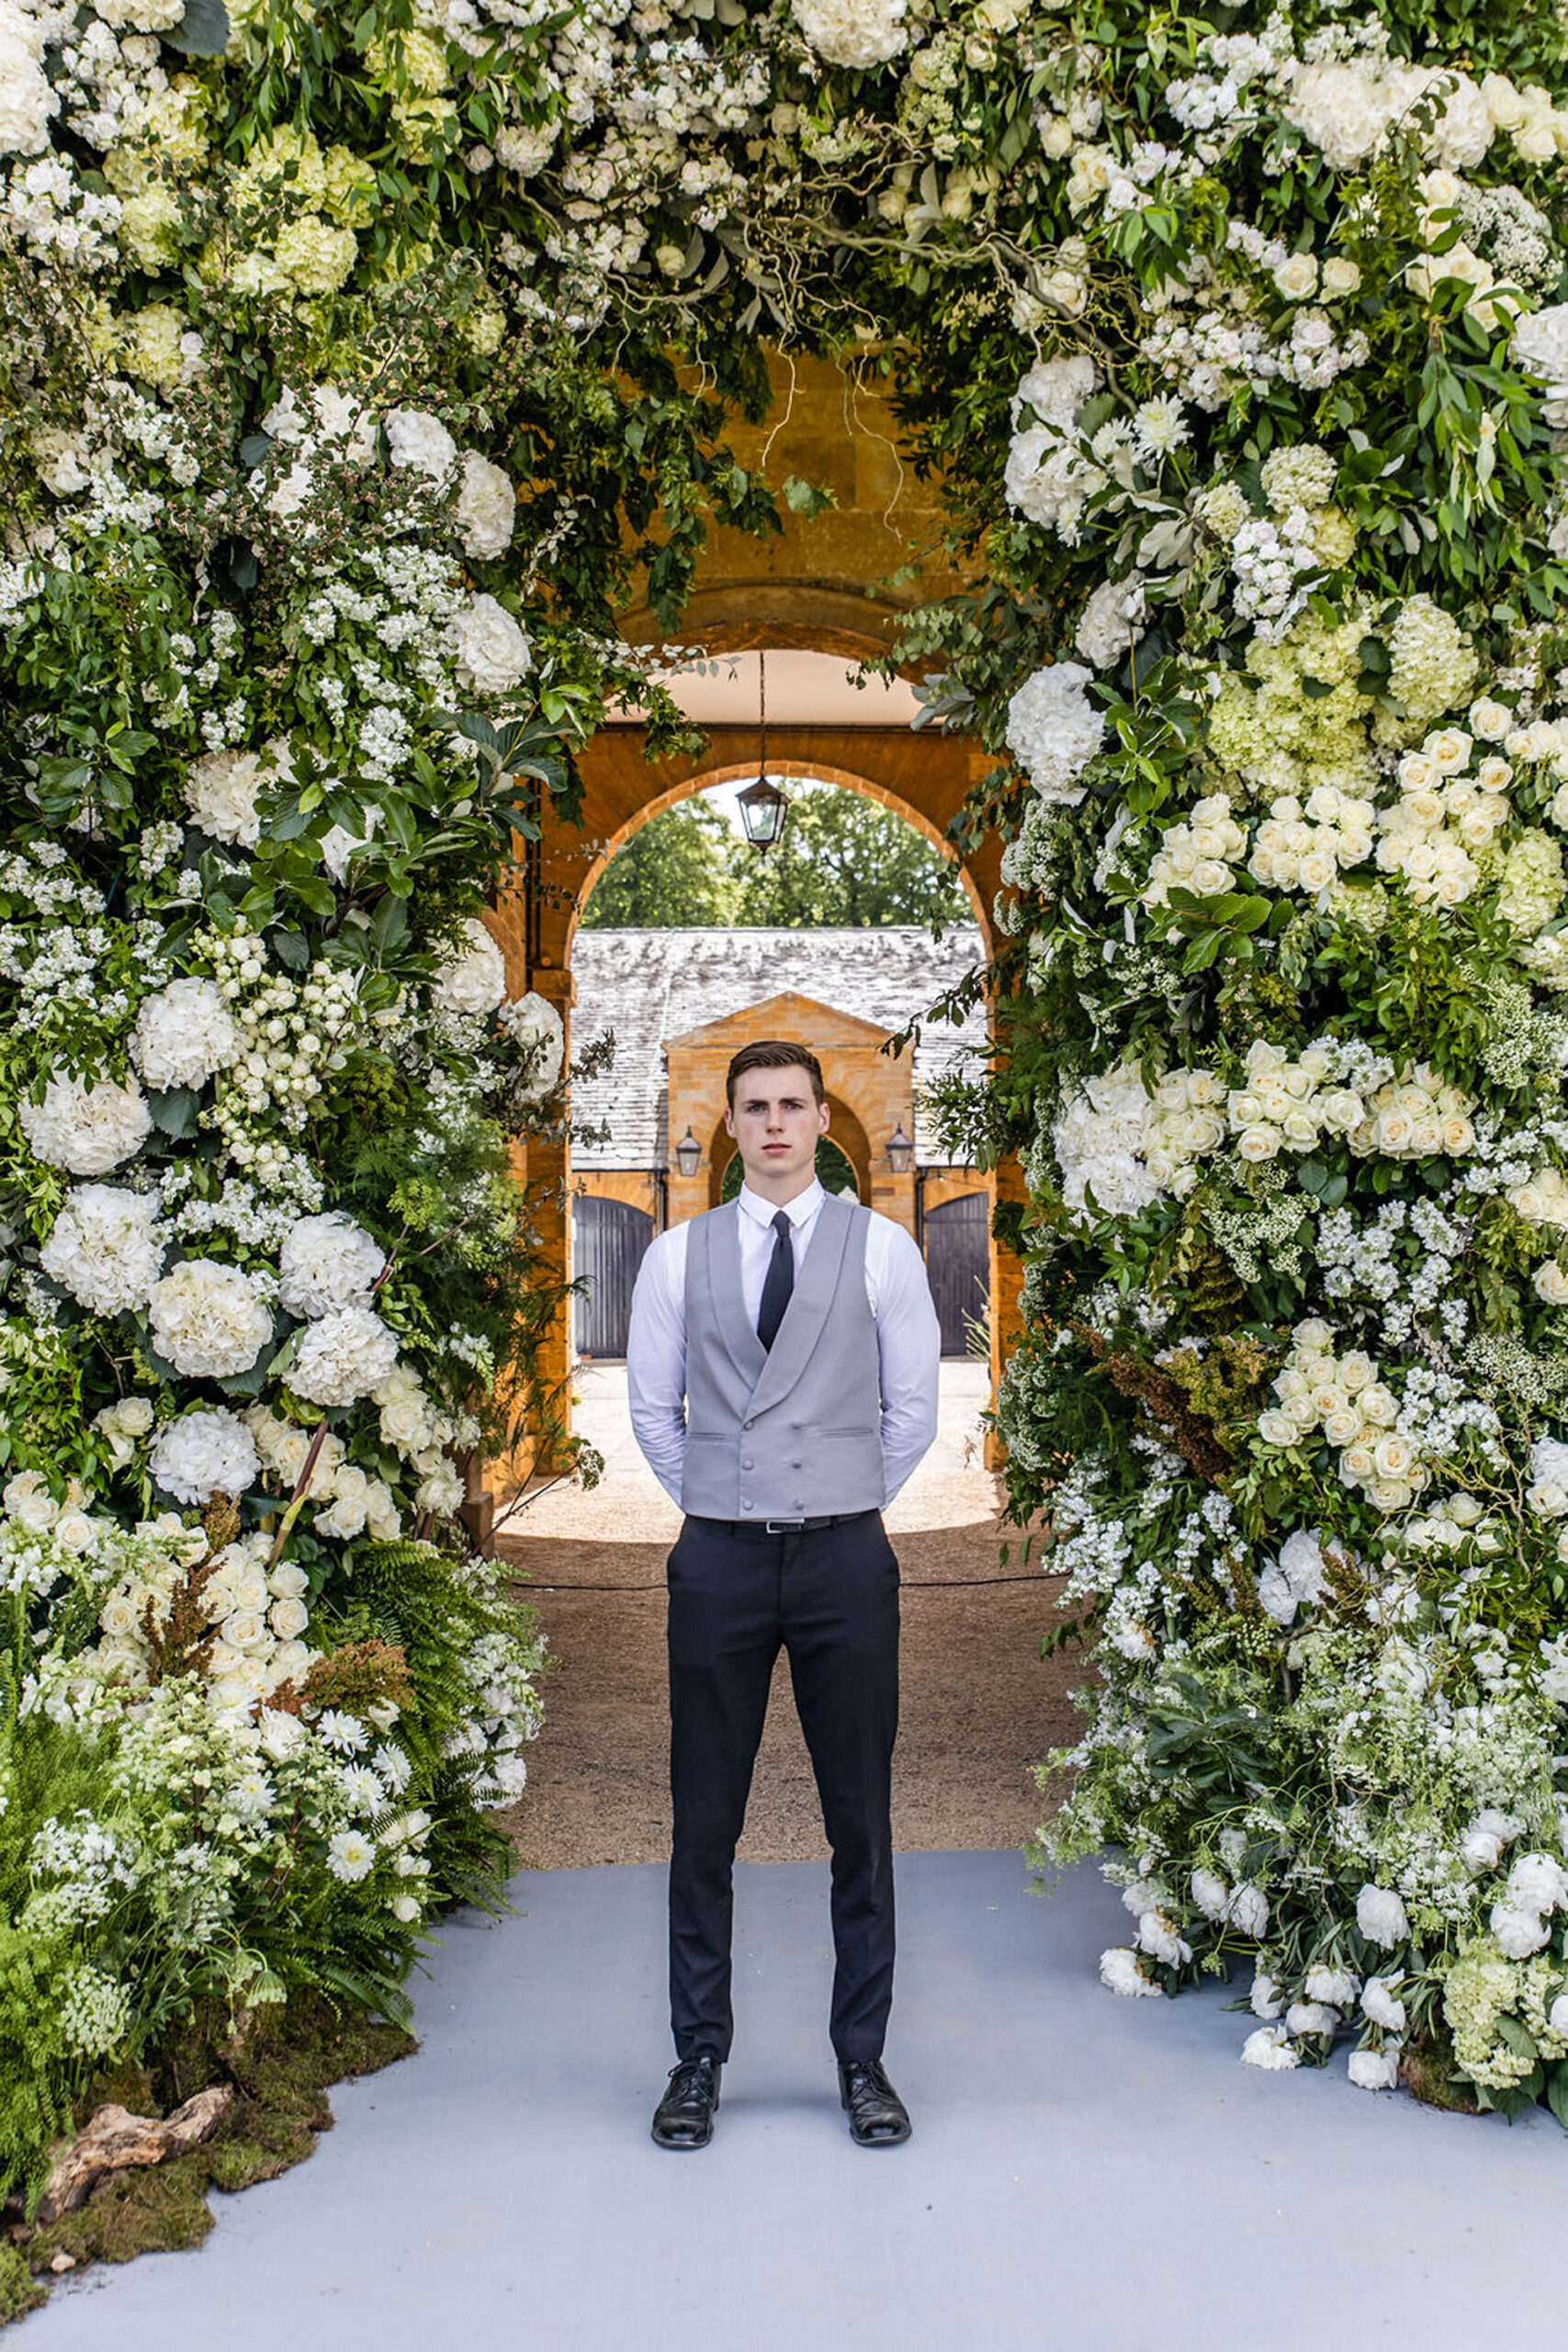 A Niemierko host stands between the pillars of an opulent floral display at the entrance to a prestigious wedding venue